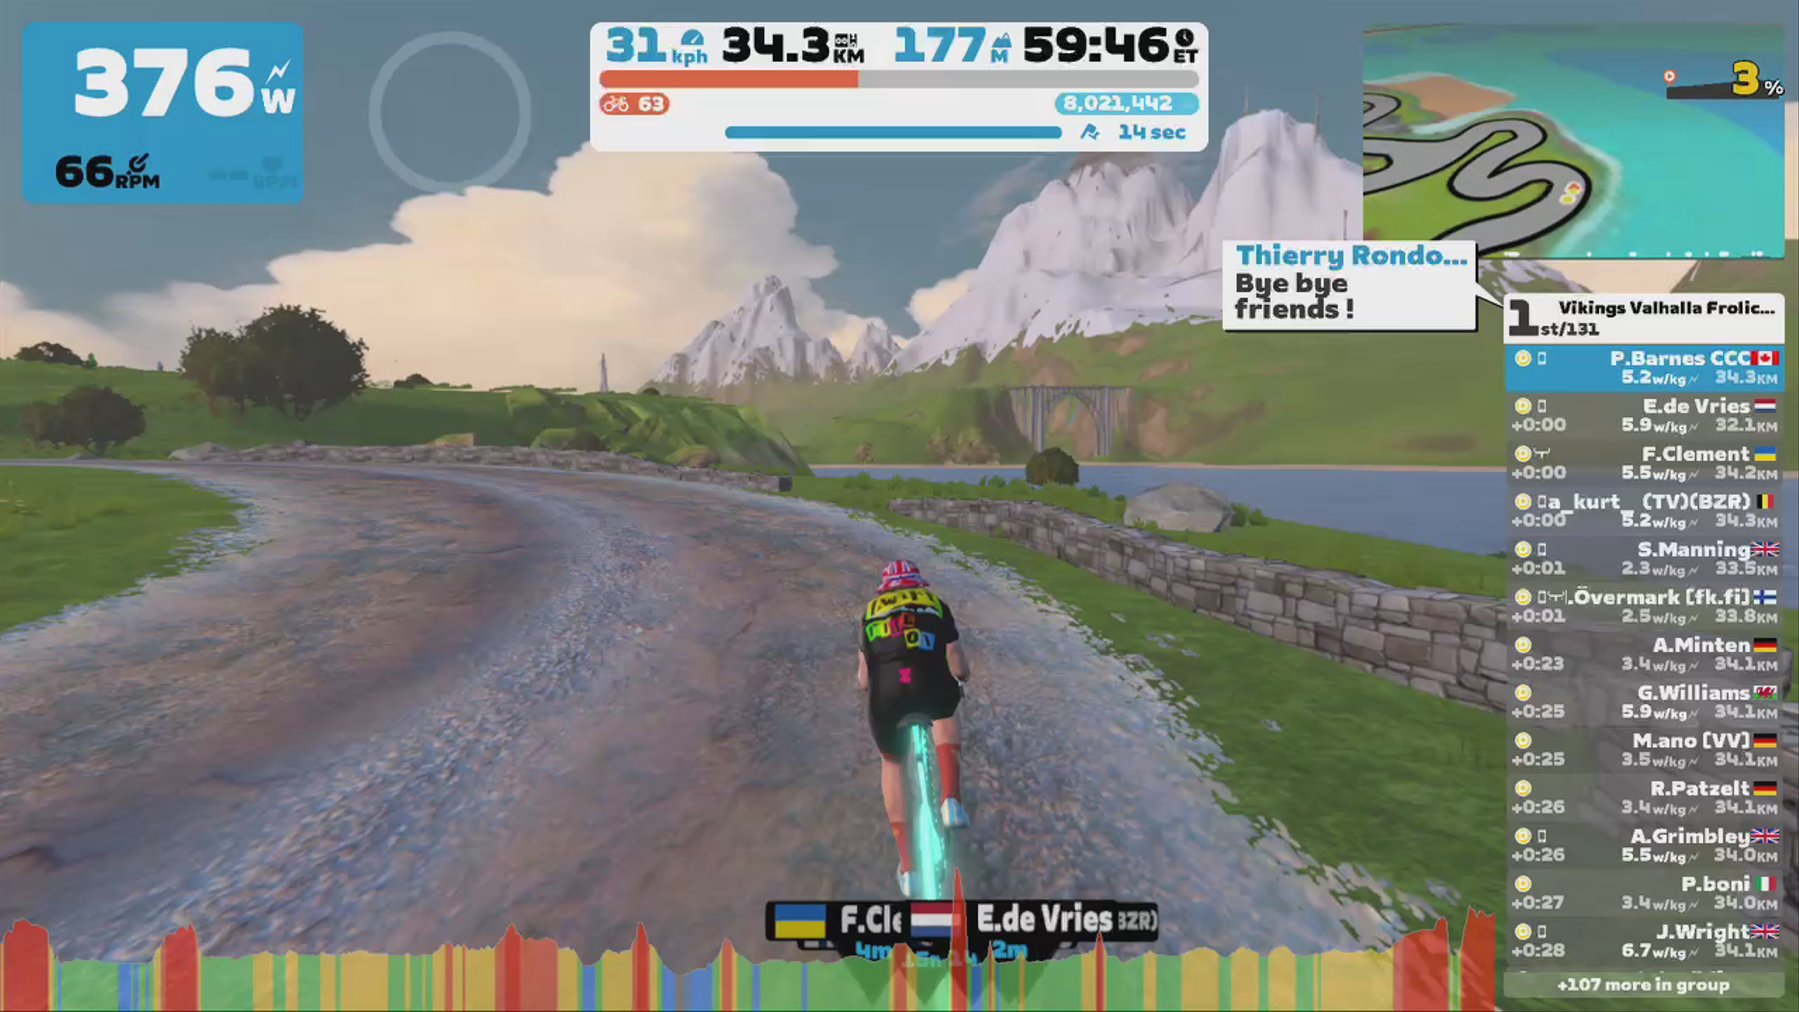 Zwift - Group Ride: Vikings Valhalla Frolicking Friday Fun-for-All (D) on The Magnificent 8 in Watopia